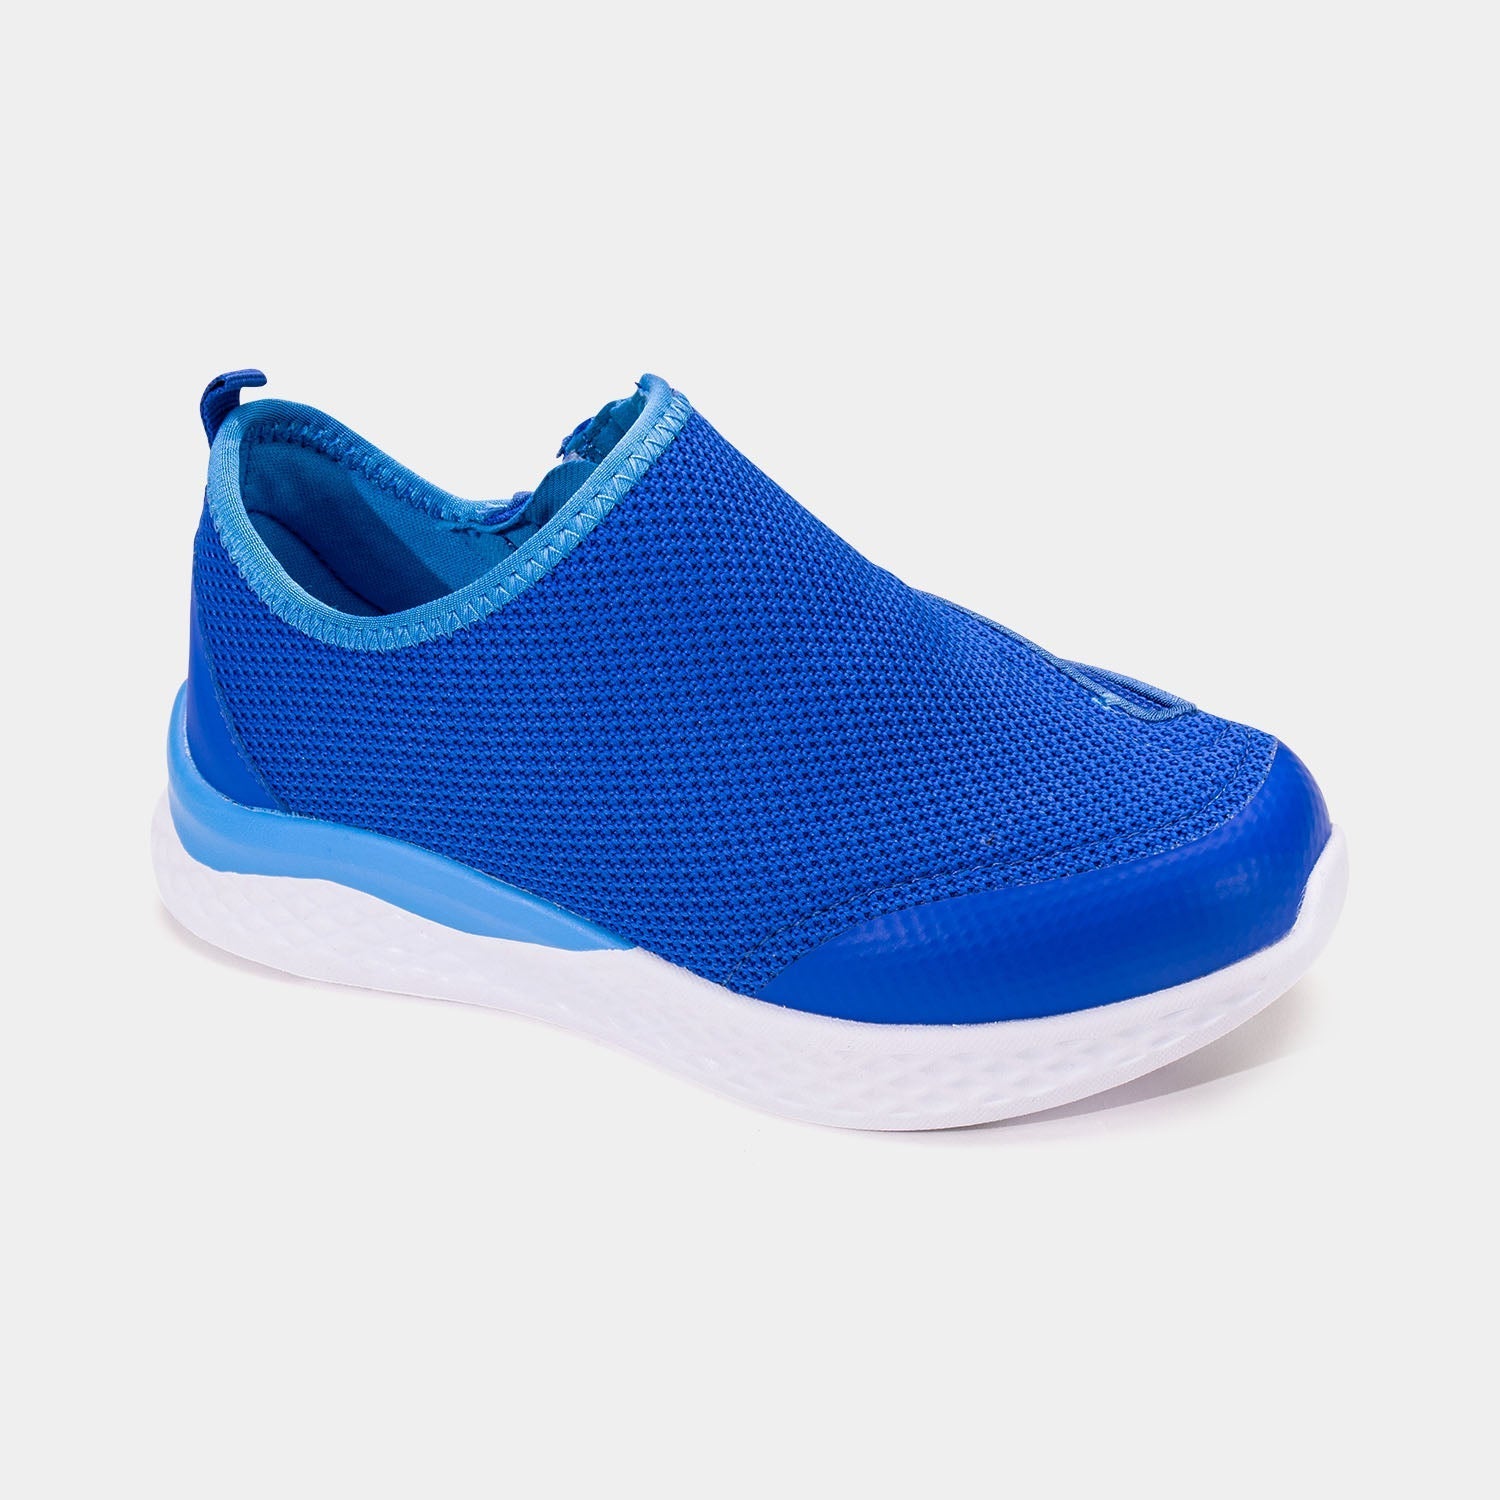 Medium blue kids shoe with white bottom, light blue accents, and side zipper access.